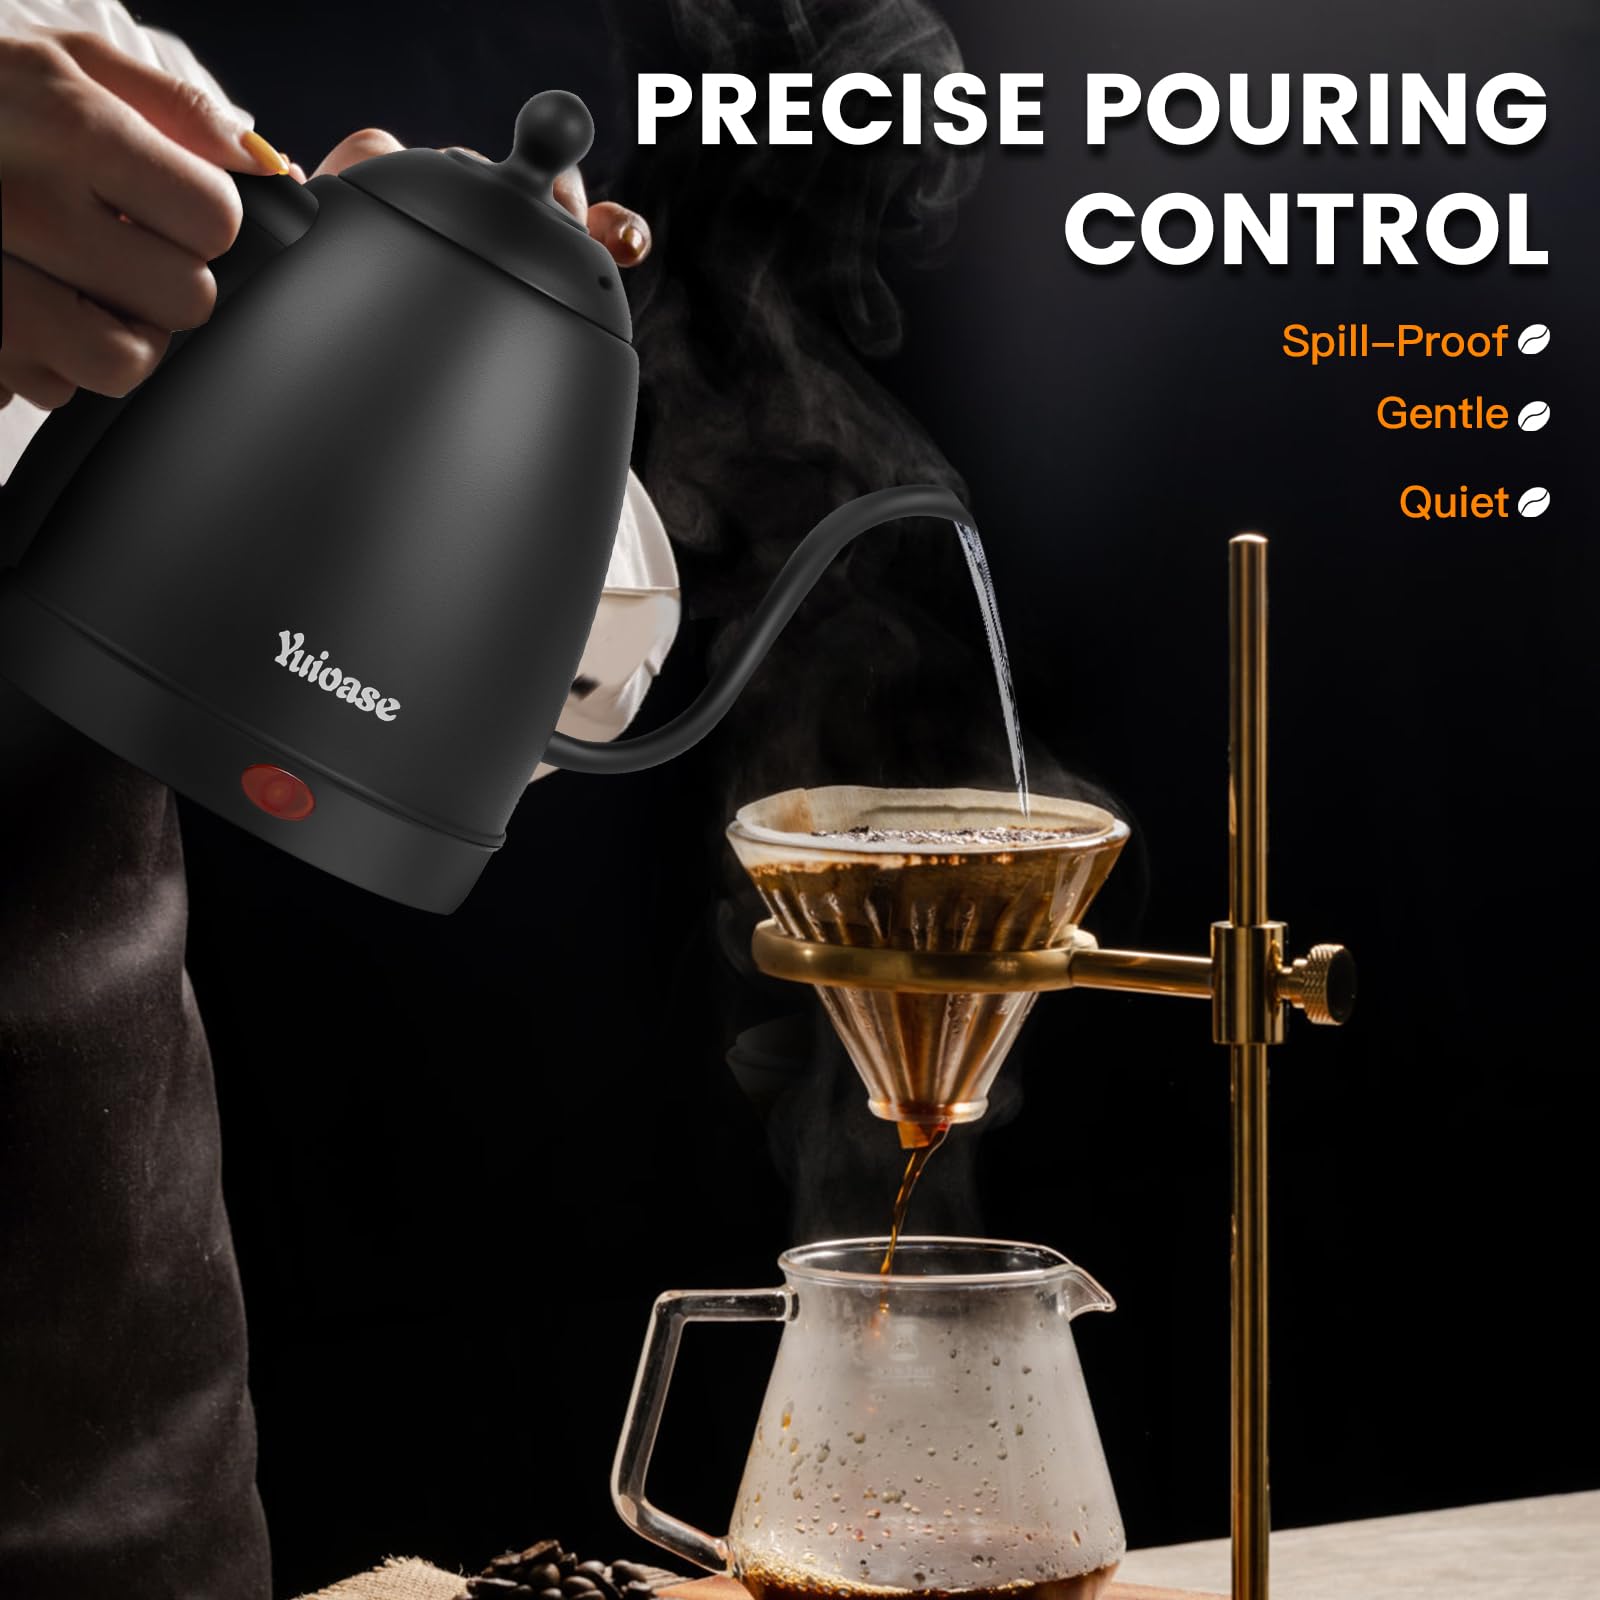 Electric Gooseneck Kettle, Stainless Steel Coffee Kettle, Auto Shutoff, Anti-dry Water Boiler, Pour-over Coffee & Tea,Matte Black 1.0L-1000W Fast Heating Kettle by YUIOASE